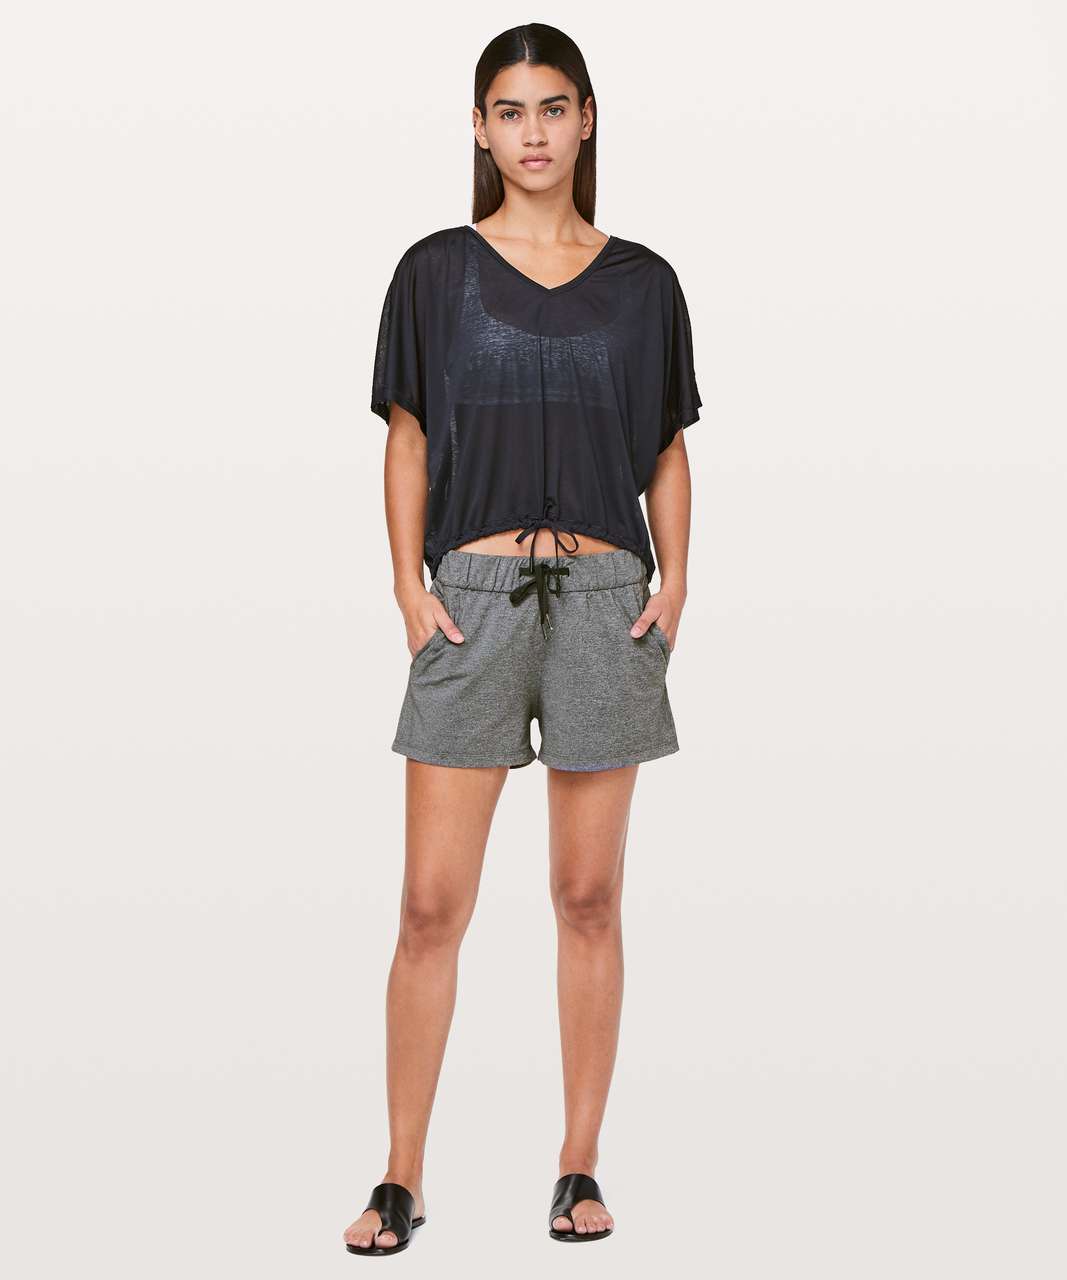 Lululemon On The Fly Short *2.5" - Heathered Black (First Release)